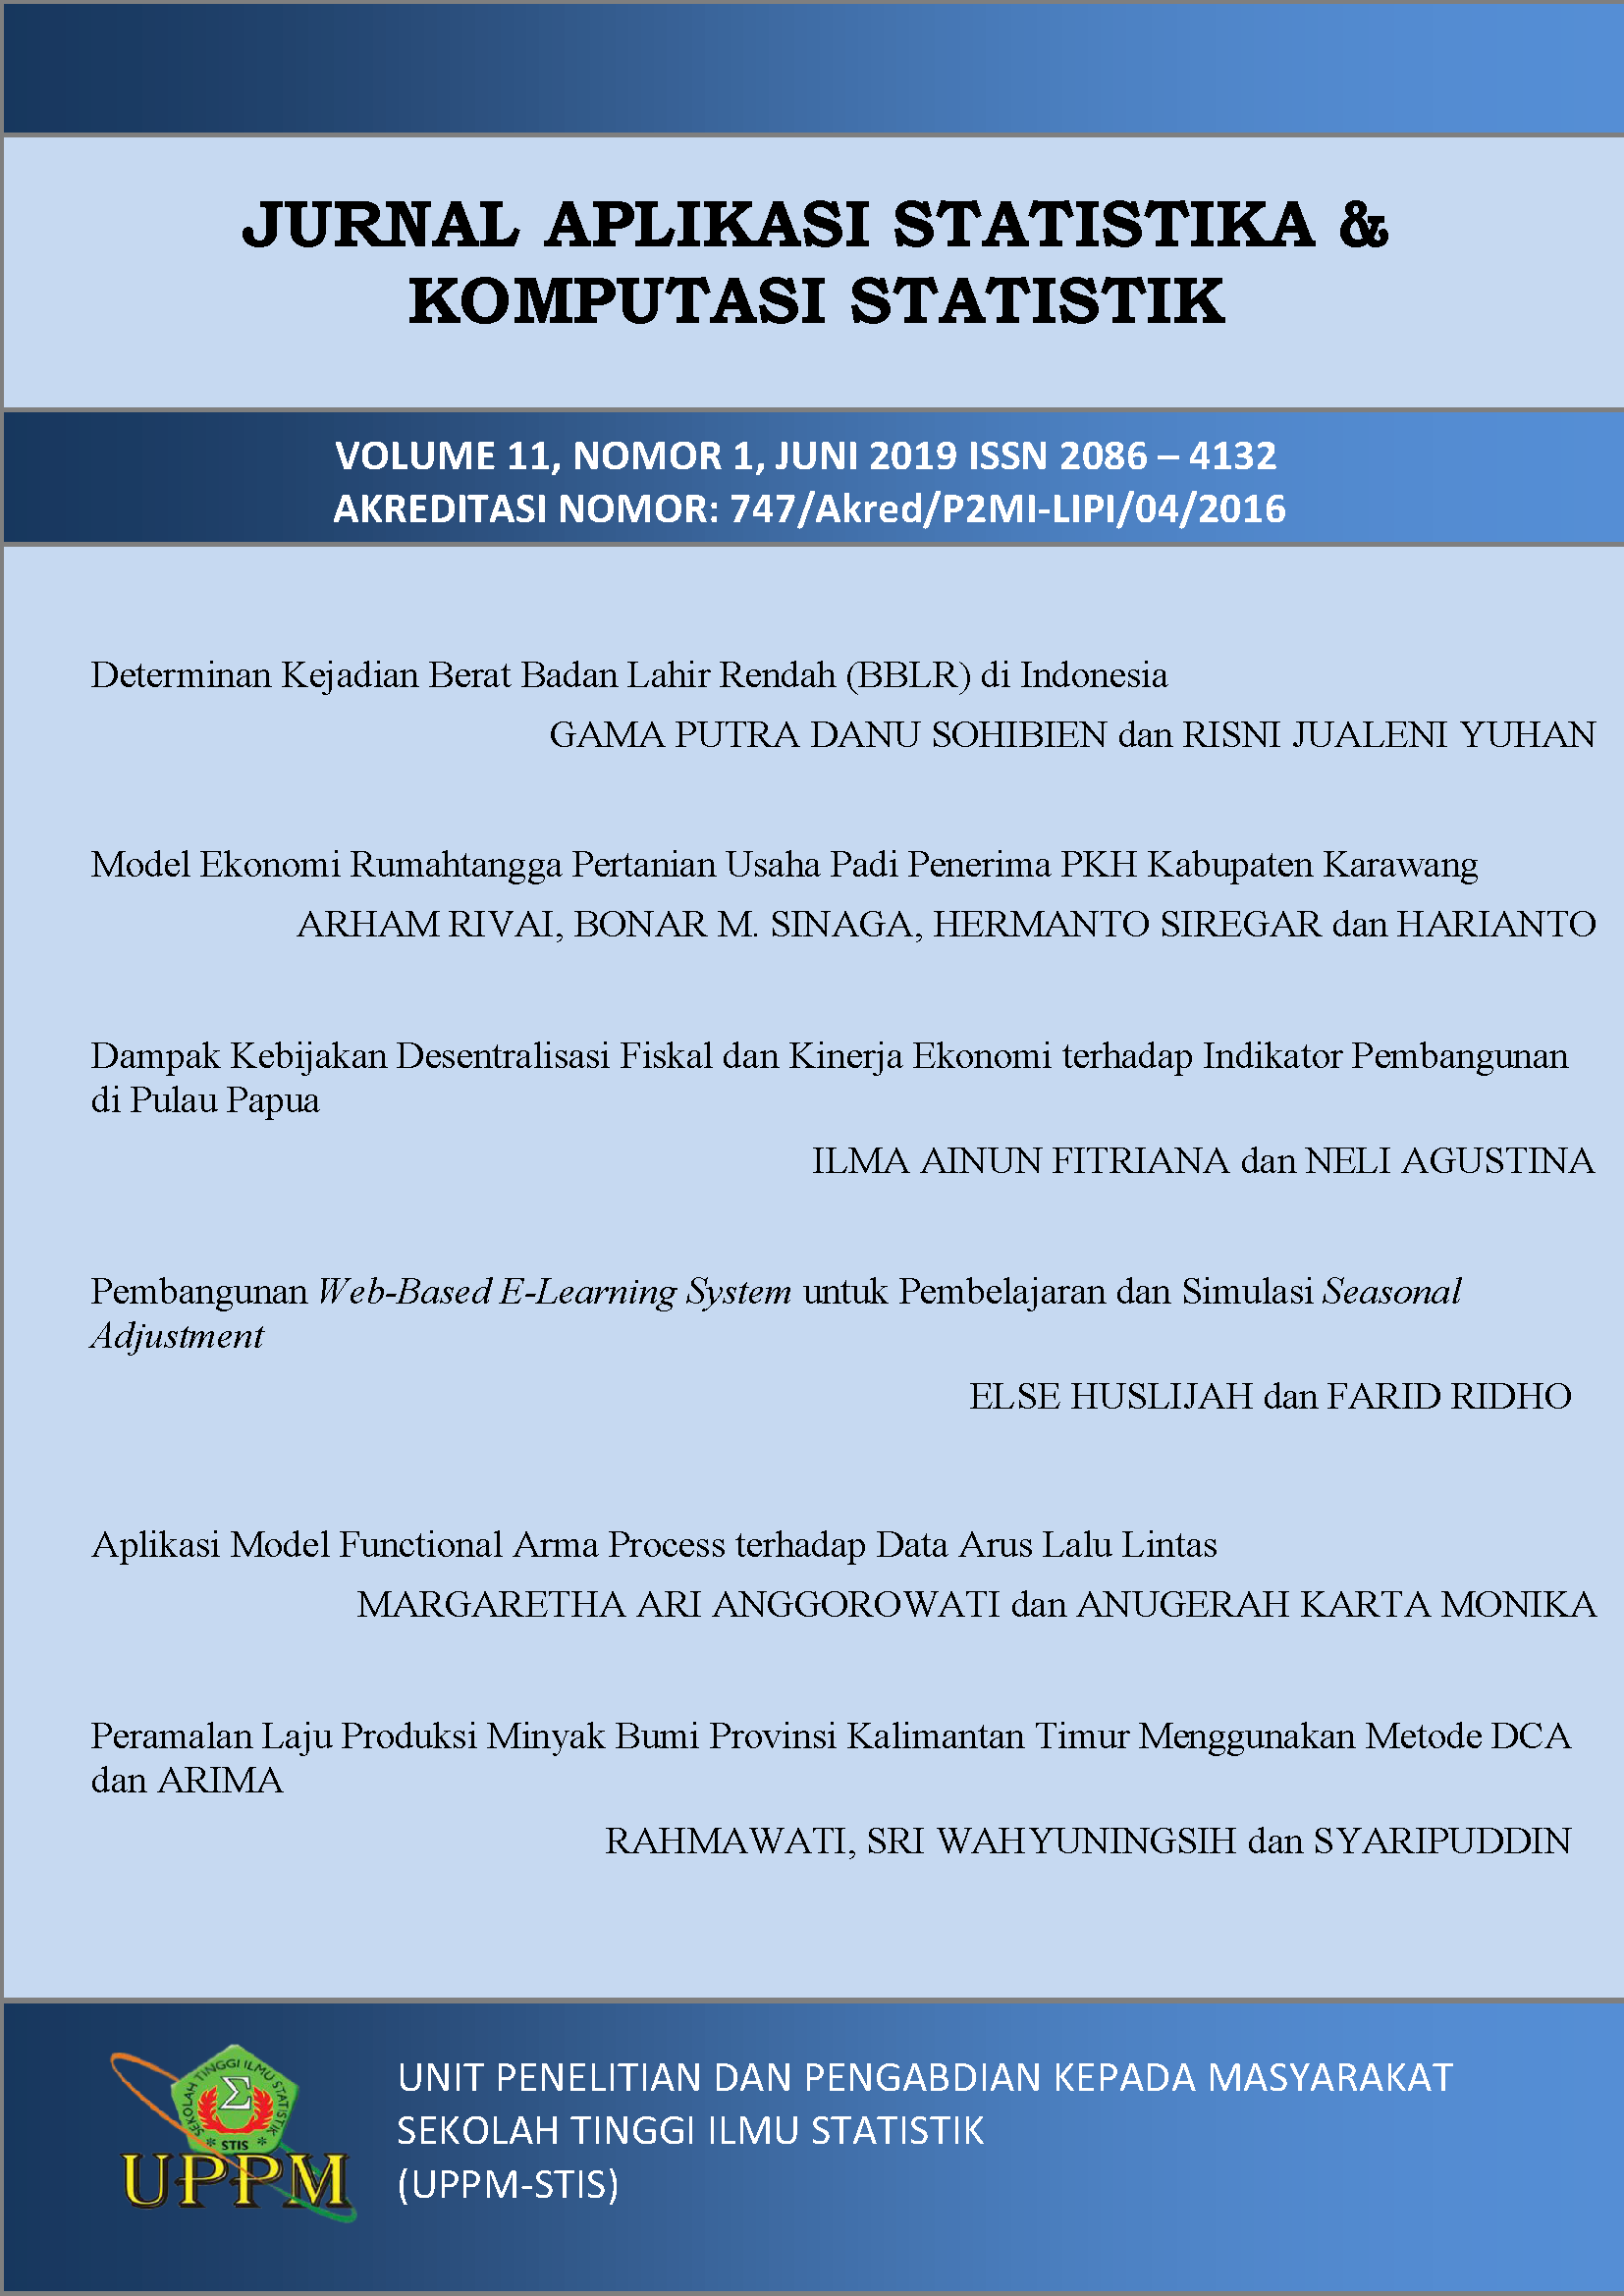 					View Vol. 11 No. 1 (2019): Journal of Statistical Application and Computational Statistics
				